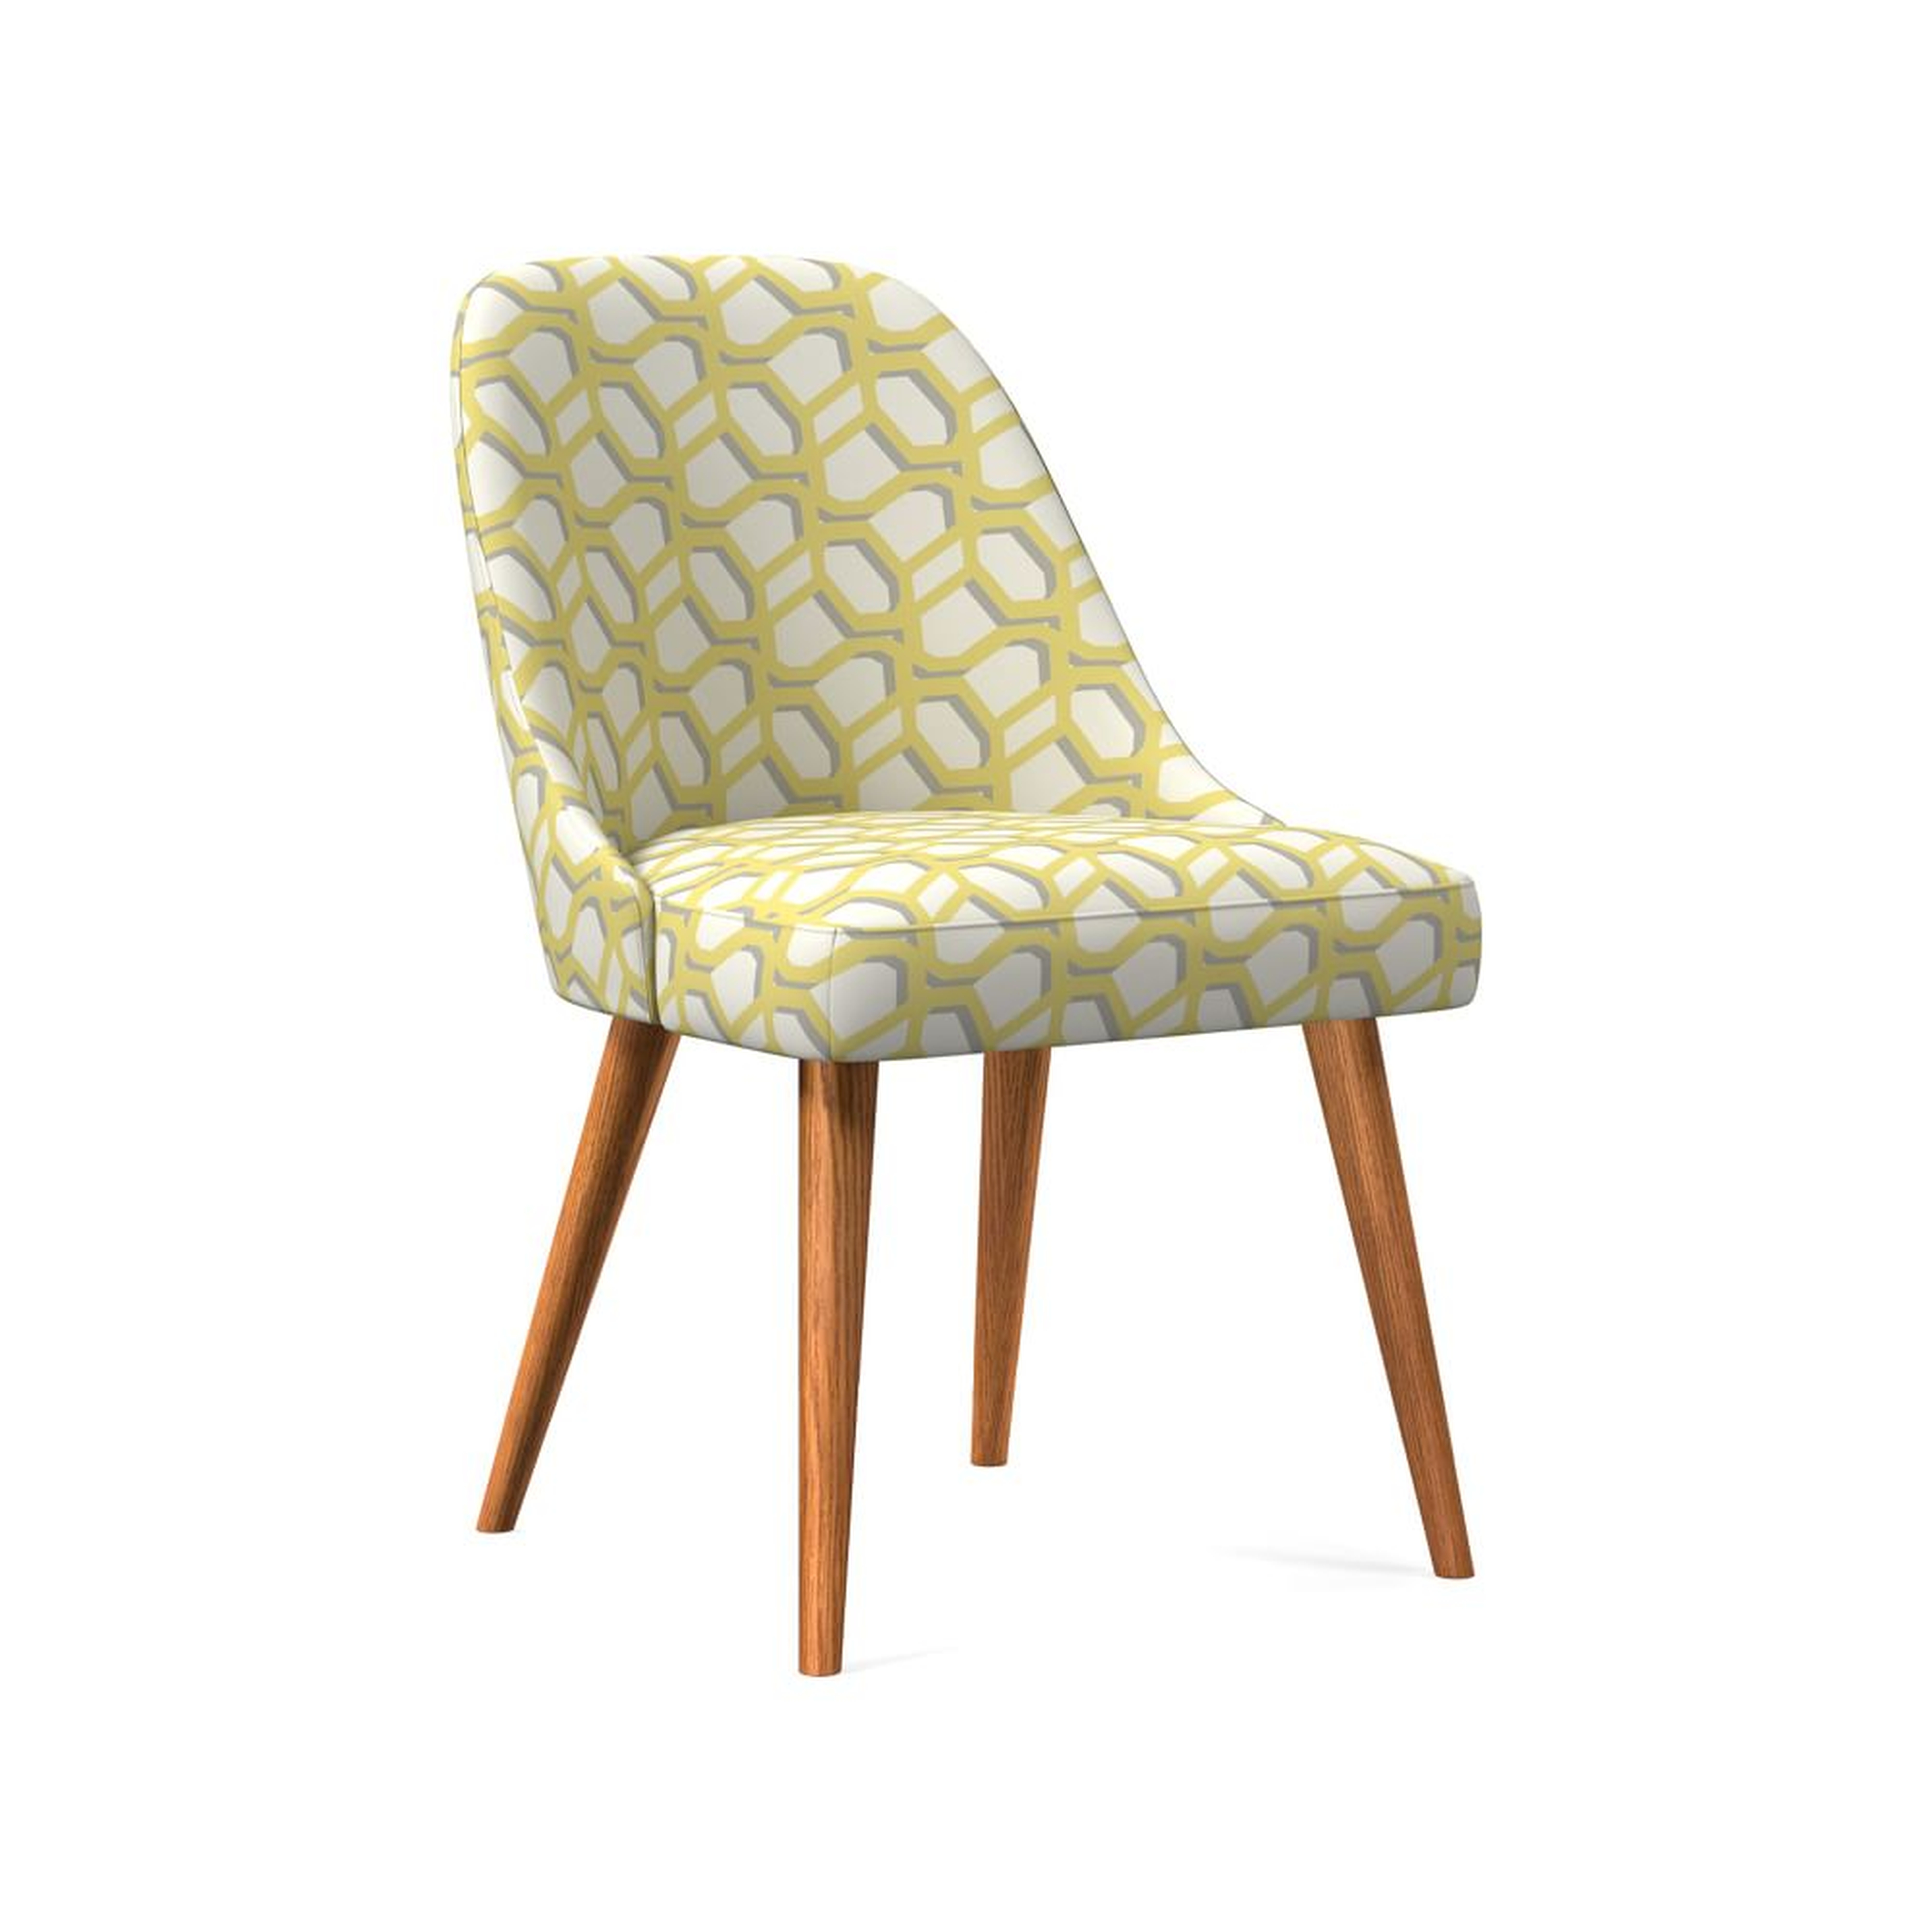 Mid-Century Upholstered Dining Chair, Yellow Stone, Modern Caning, Pecan - West Elm